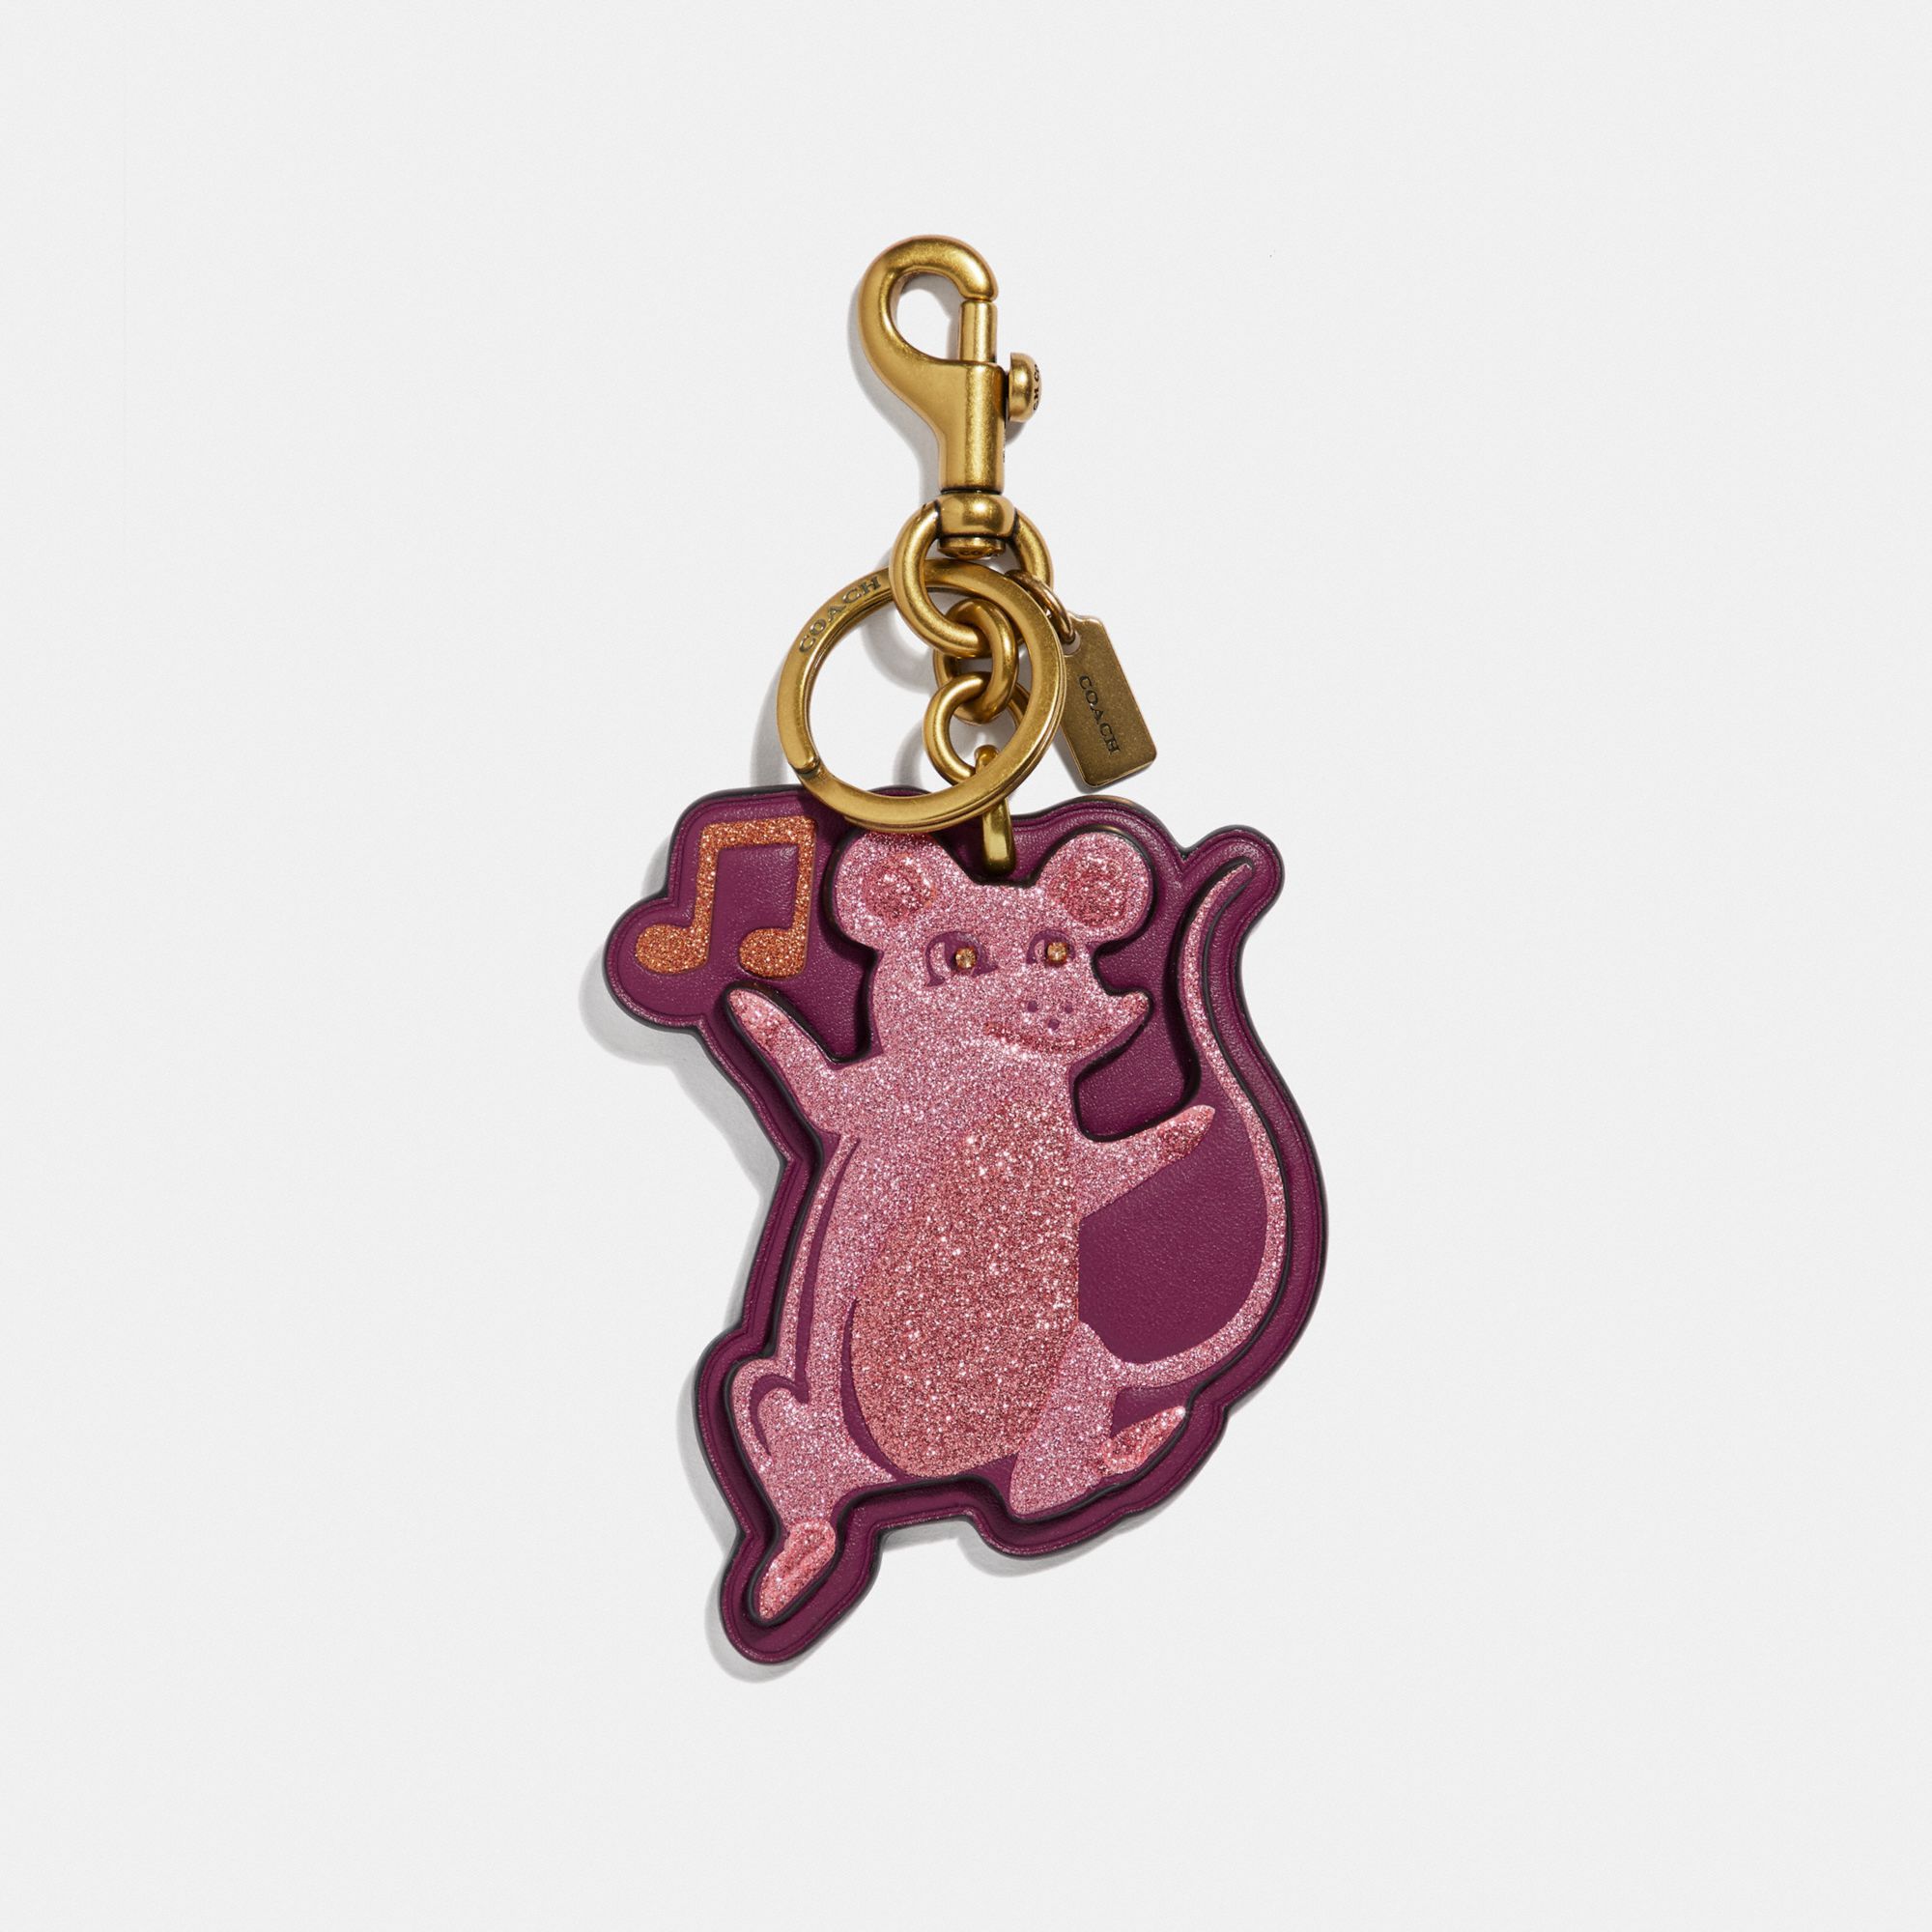  Coach Party Mouse Bag Charm - Dark Berry 